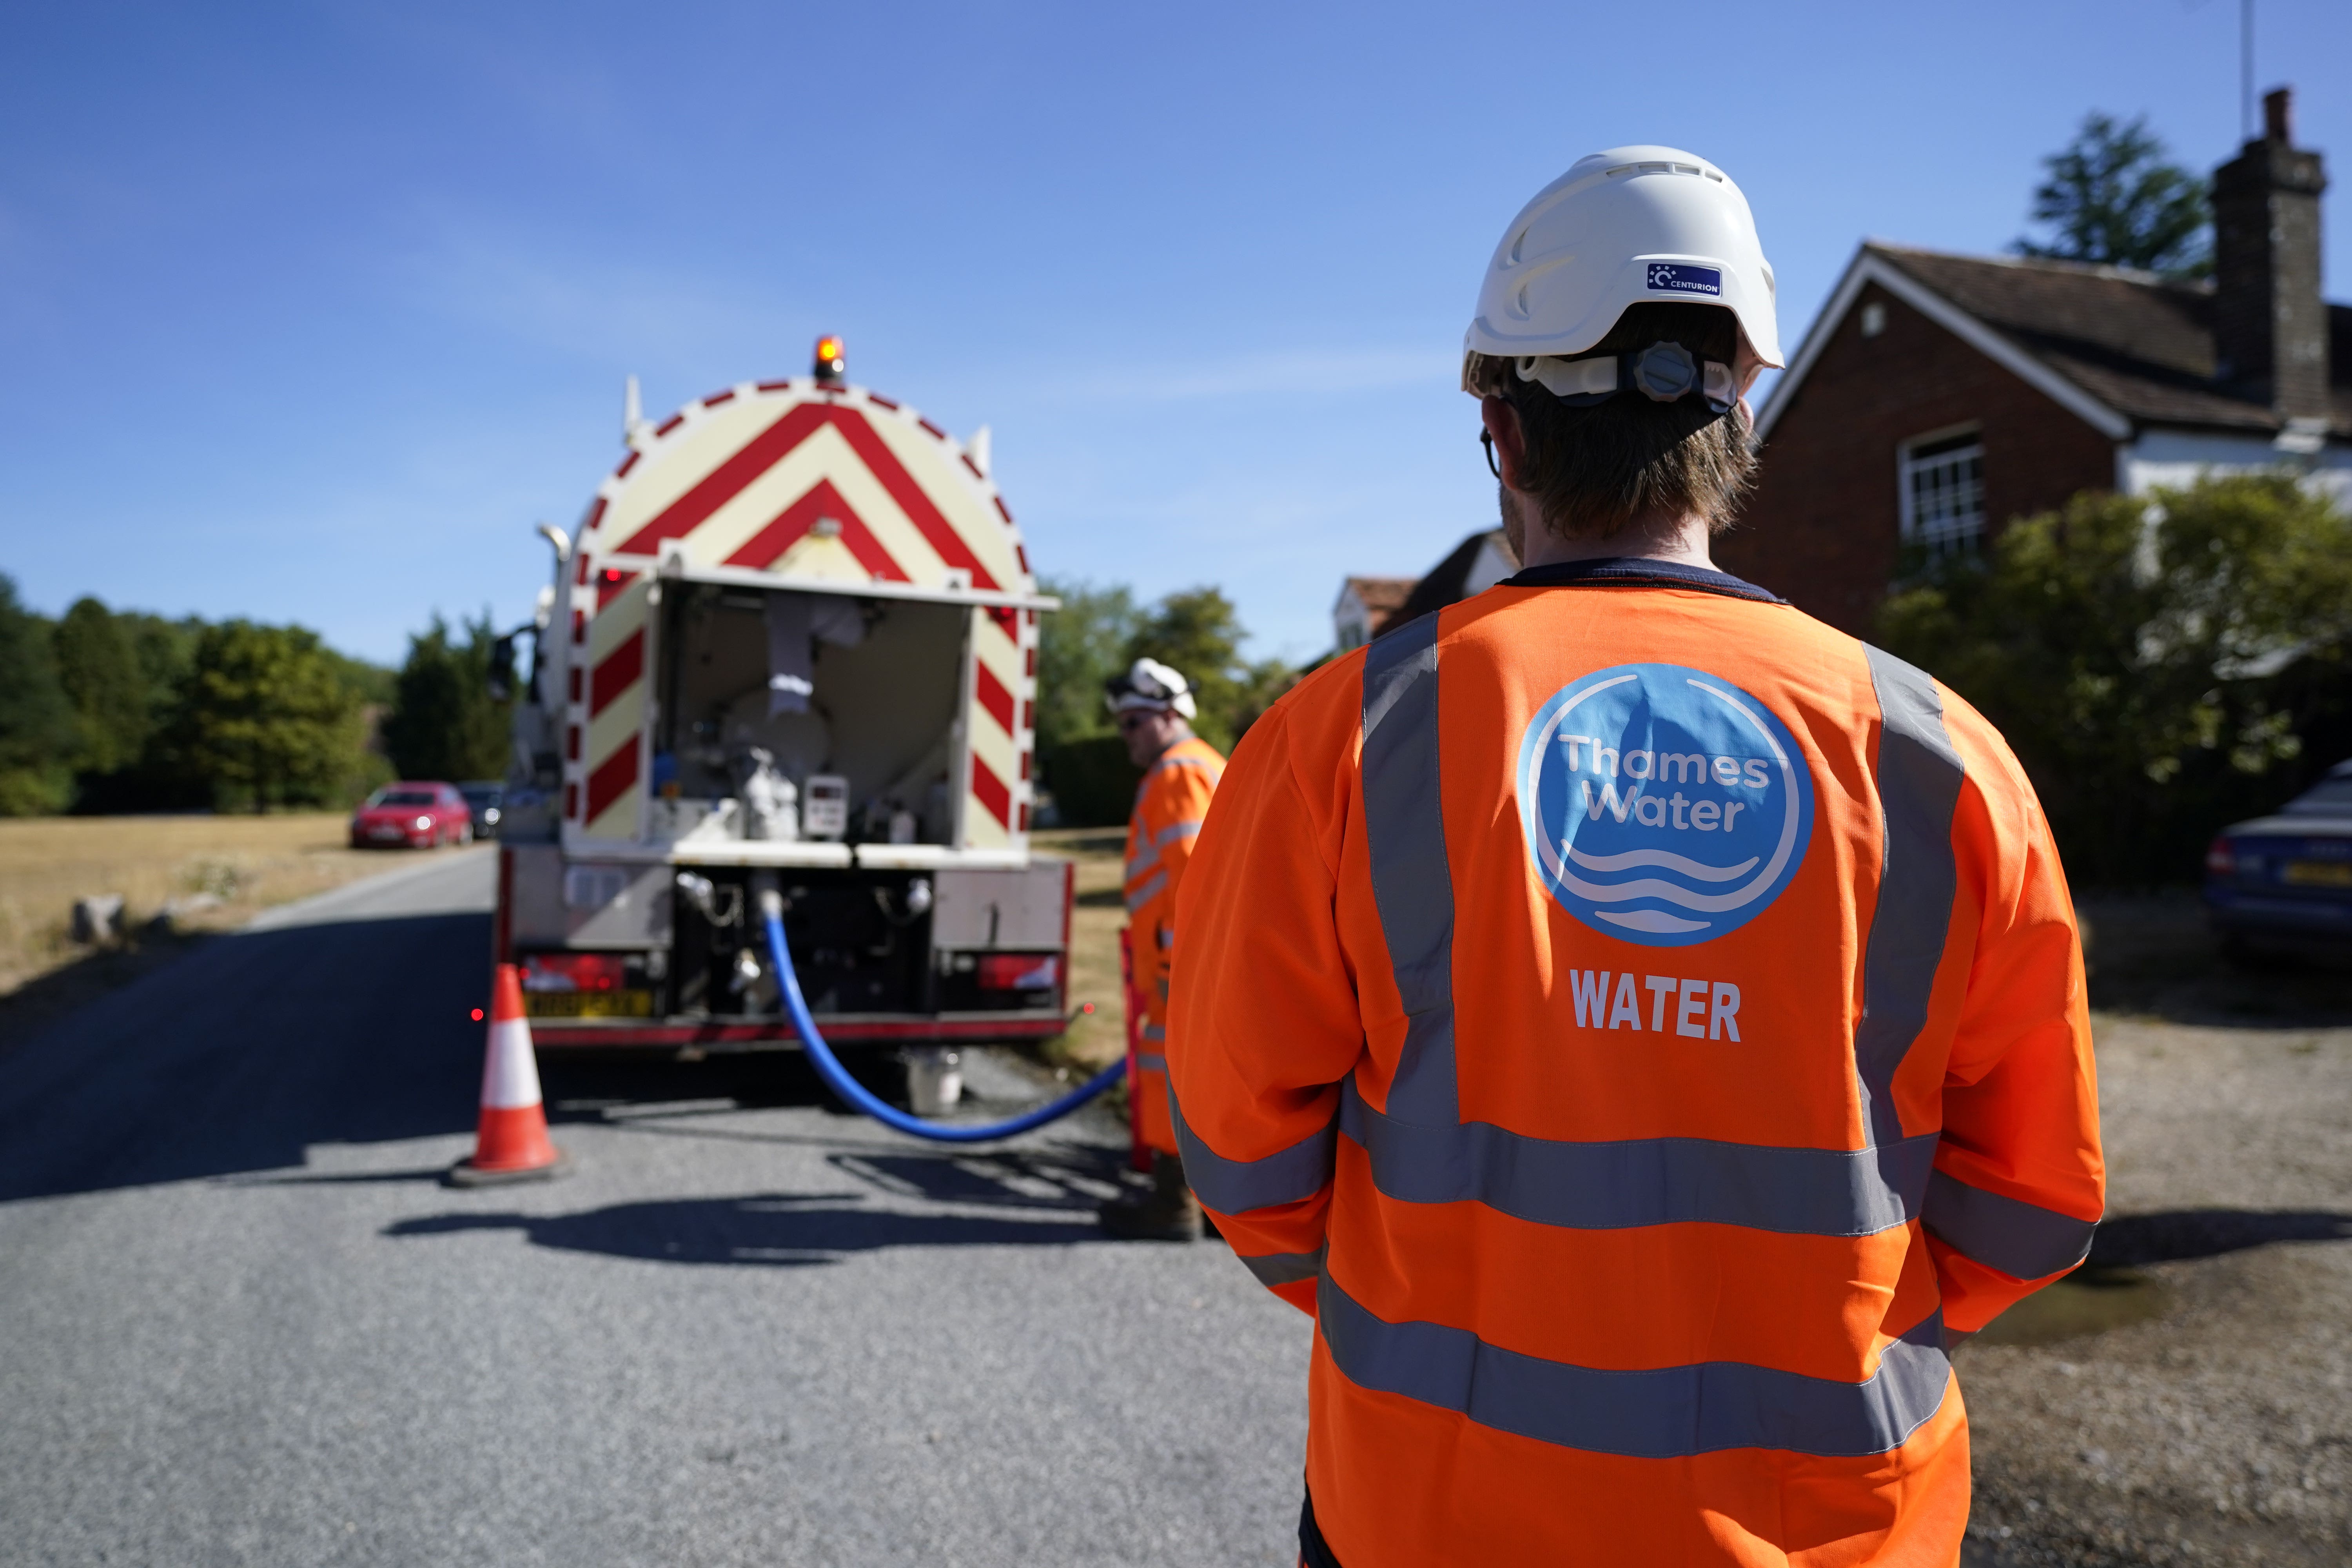 Thames Water has secured another £750 million in emergency funding from its shareholders (Andrew Matthews/PA)